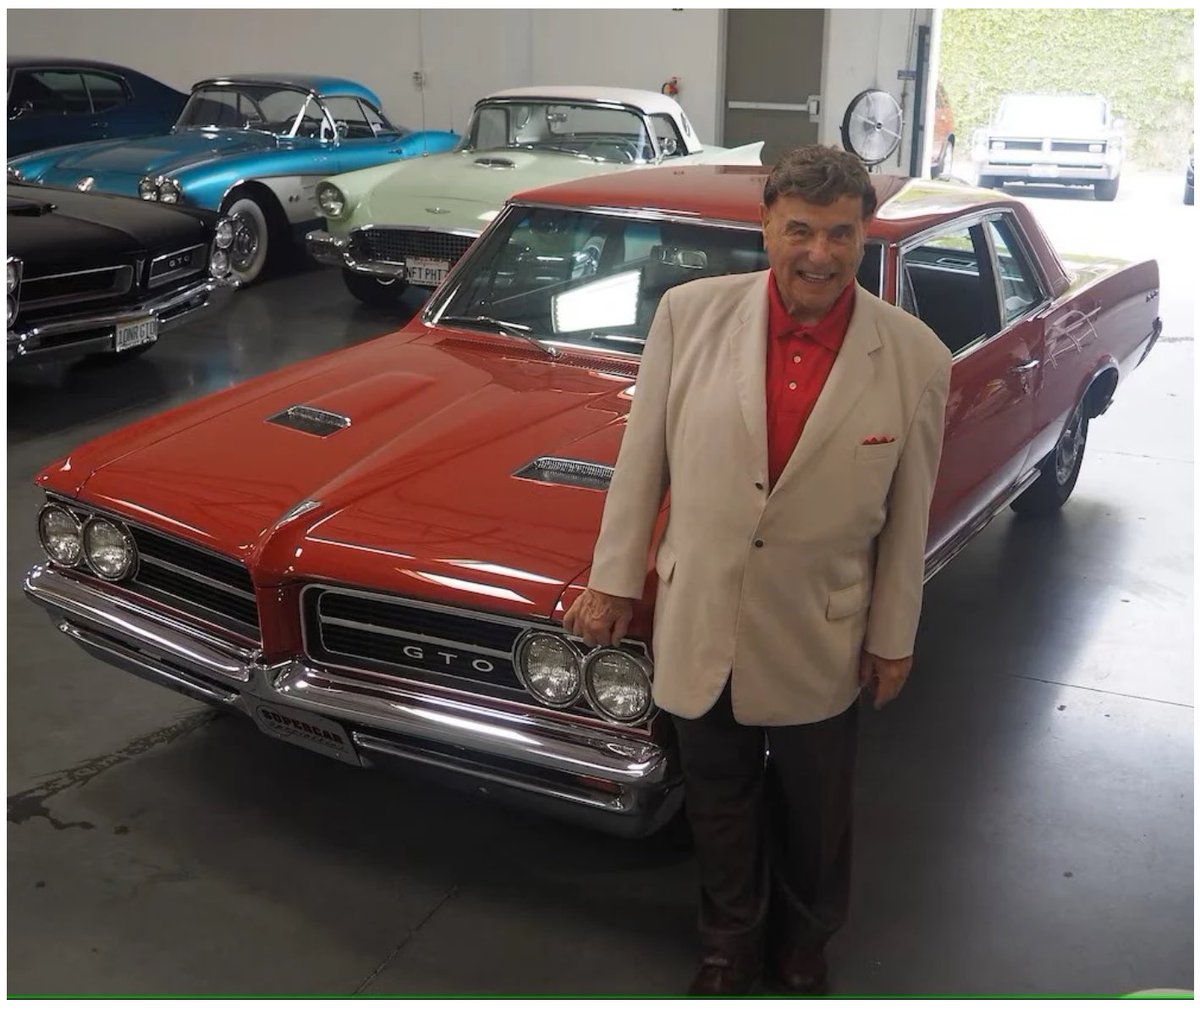 The Godfather of the GTO, Jim Wangers, died one year ago on April 29. After John DeLorean created the classic muscle car formula of a large-car engine in an intermediate body, marketing whiz Wangers created the advertising campaign that made the car a cultural icon.